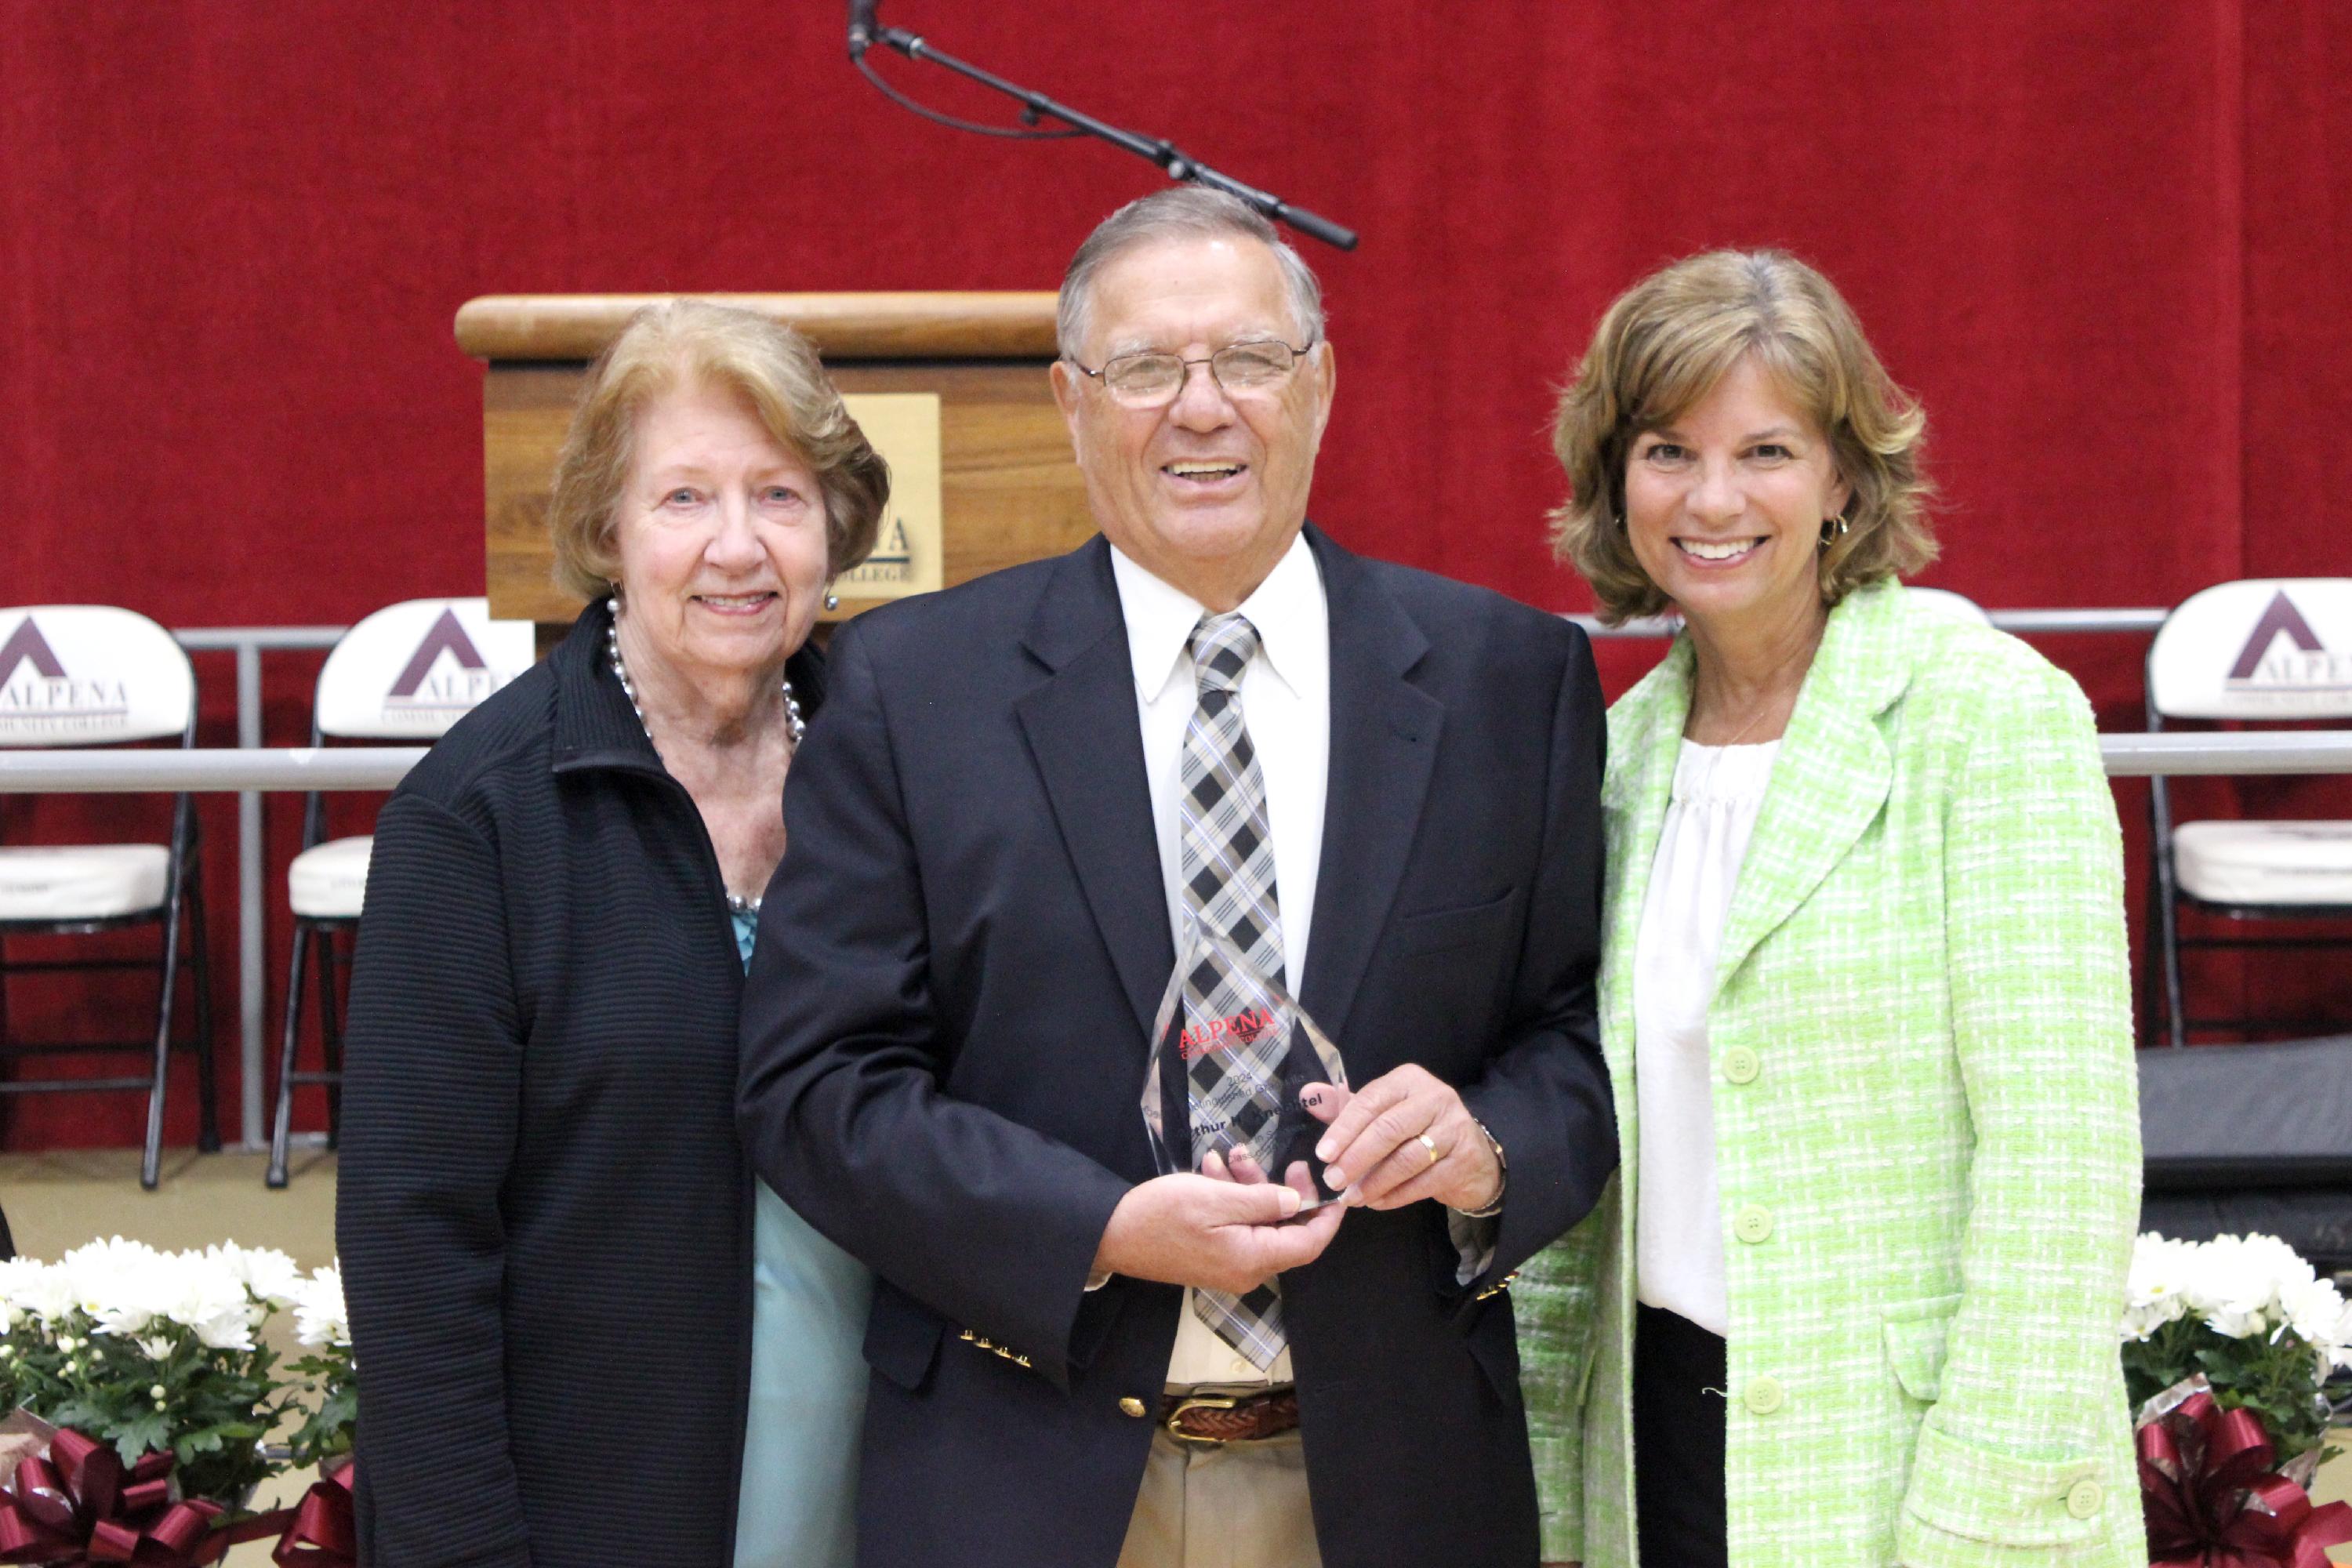 Art Knechtel poses with his award alongside his wife and daughter